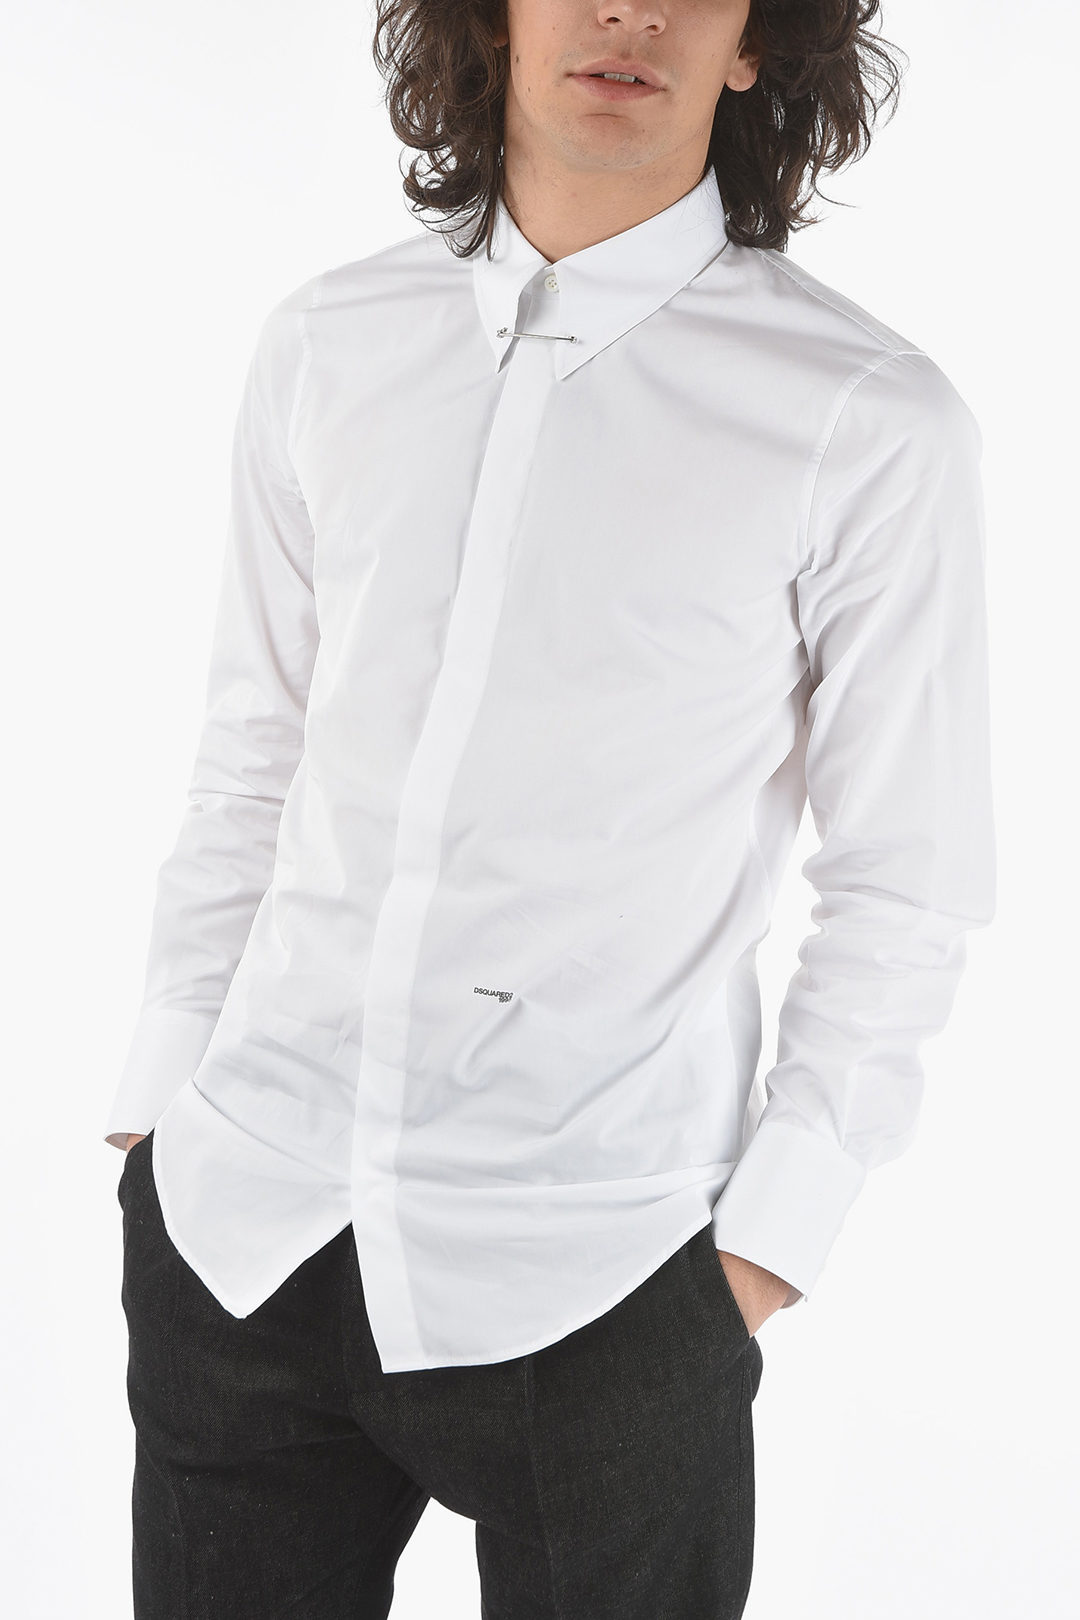 tandarts Republiek kans Dsquared2 Popeline Cotton Slim Fit Shirt with Pin on The Collar men -  Glamood Outlet